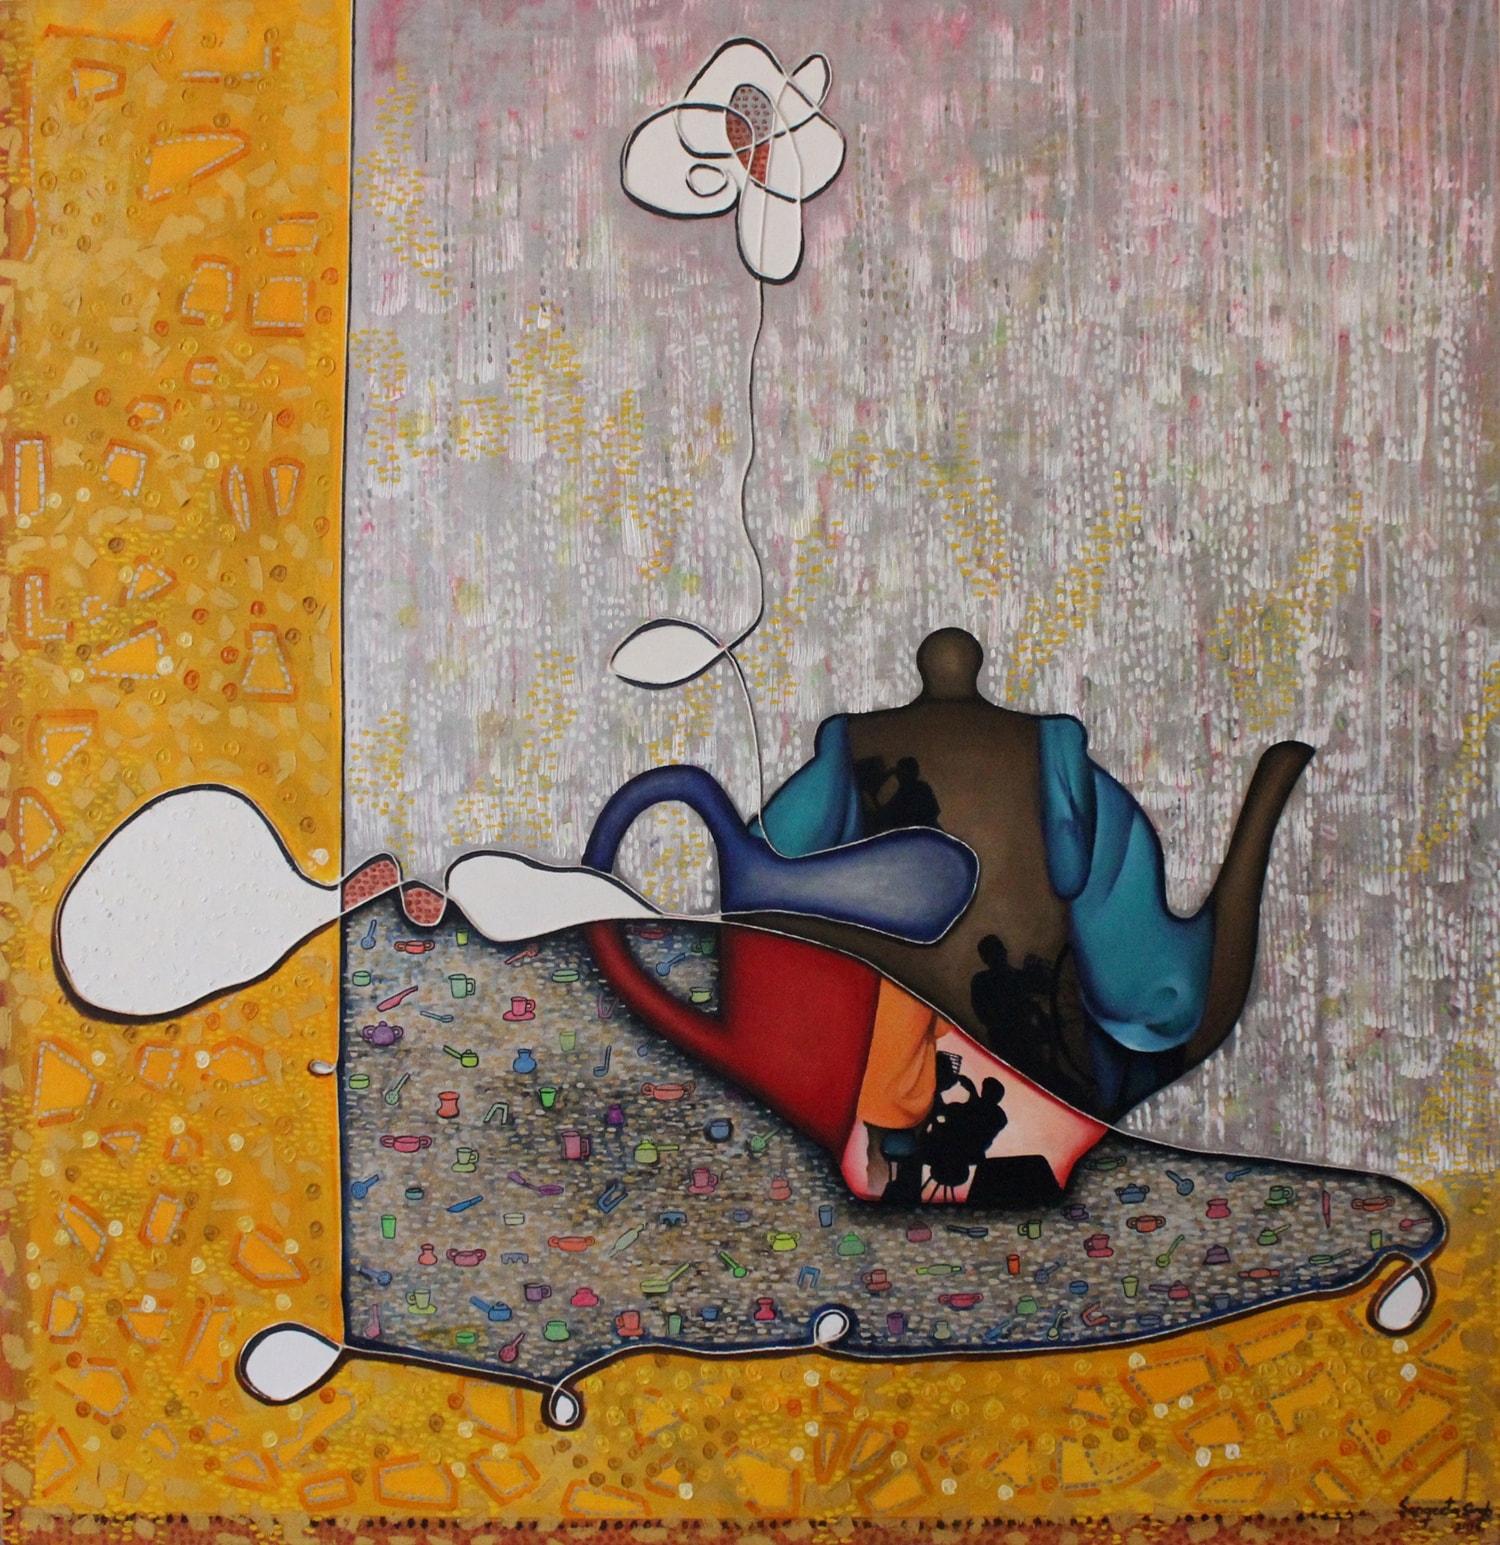 Sangeeta Singh Figurative Painting - Tea Side Story, Mixed Media on Canvas by Contemporary Indian Artist “In Stock”